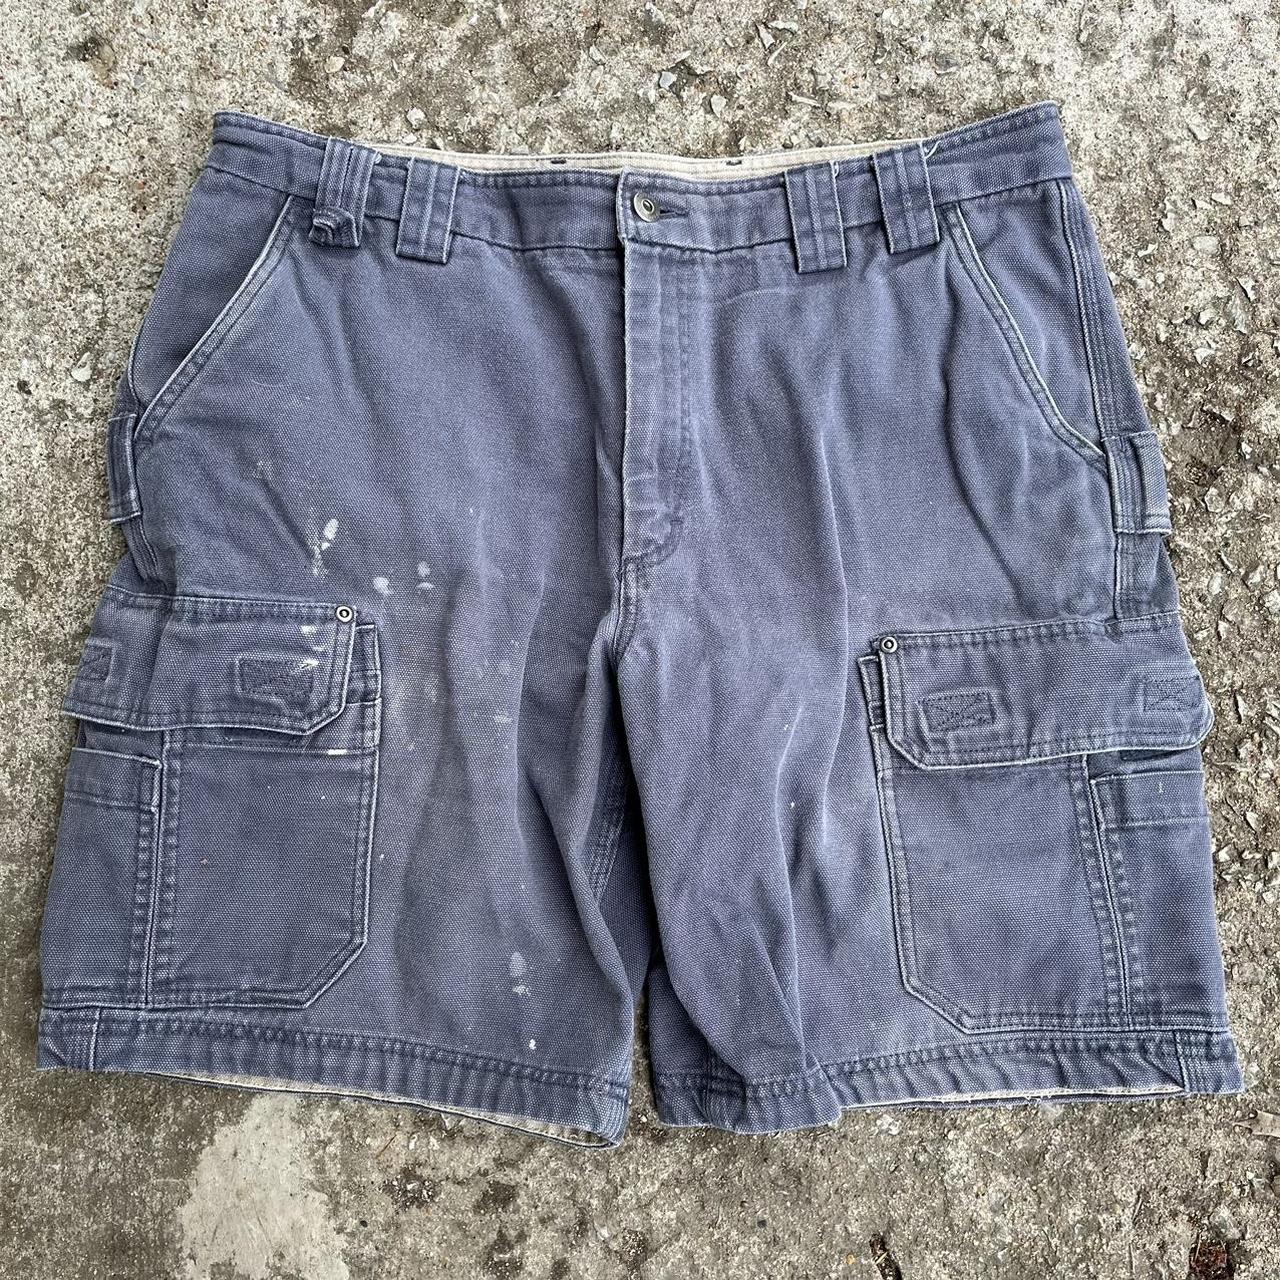 cargo linen jorts !! these longer shorts are perfect - Depop